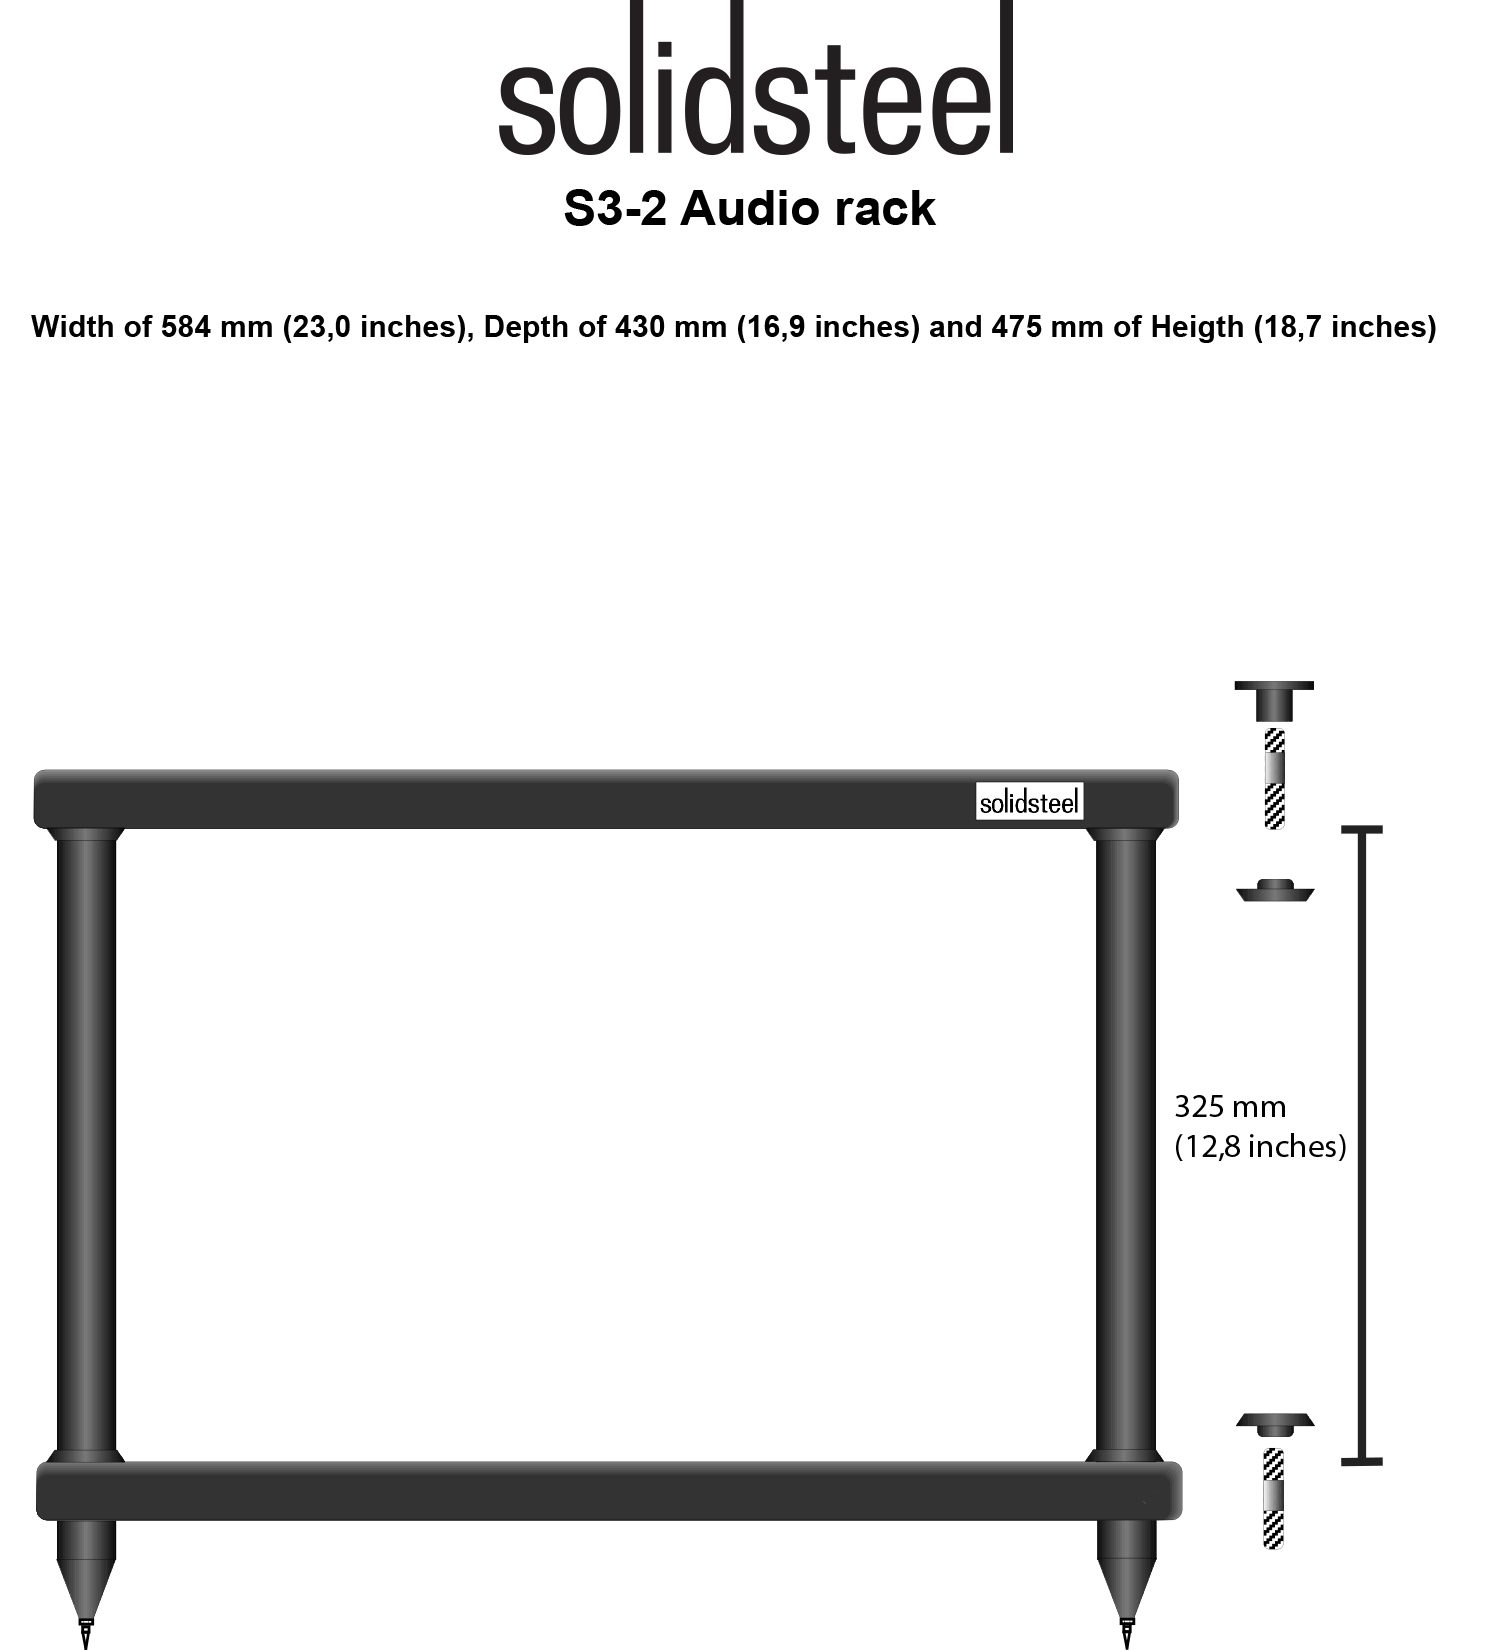 Solidsteel S3-2 taille dimensions rack